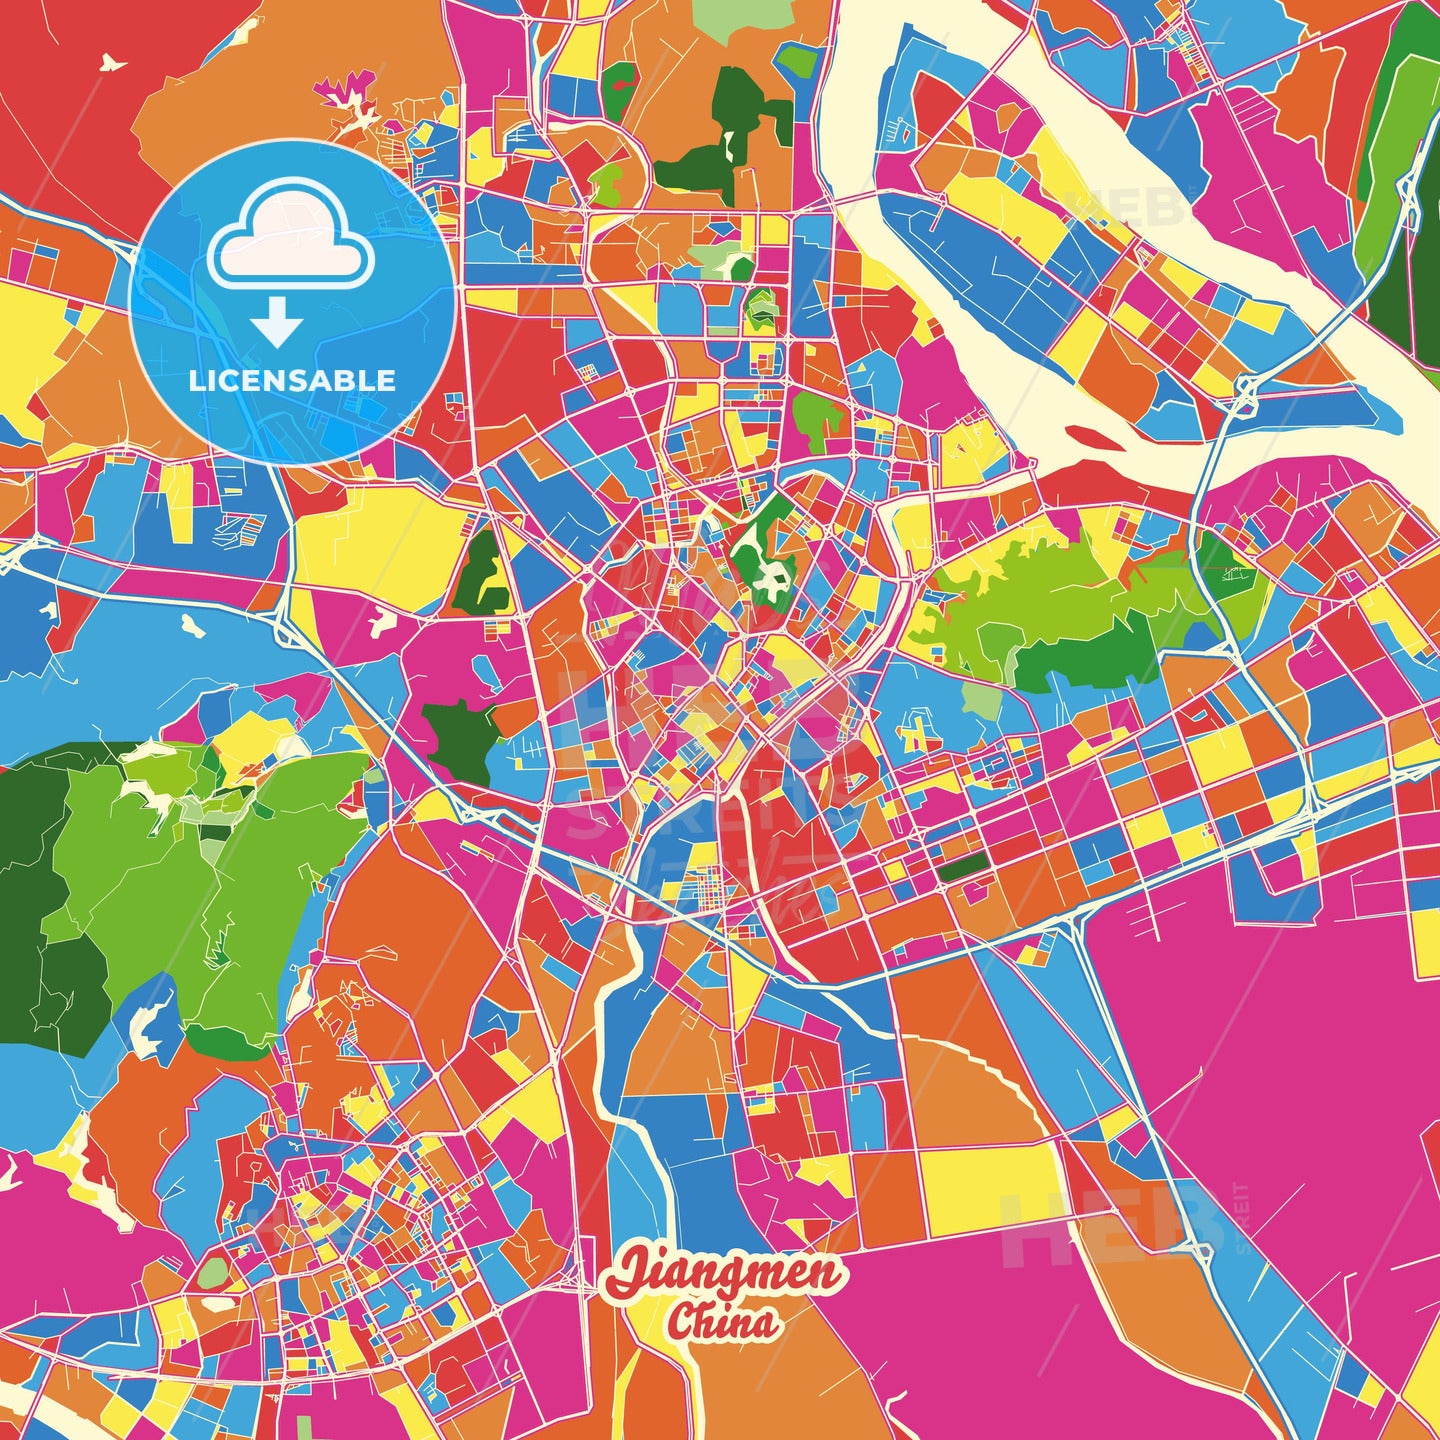 Jiangmen, China Crazy Colorful Street Map Poster Template - HEBSTREITS Sketches